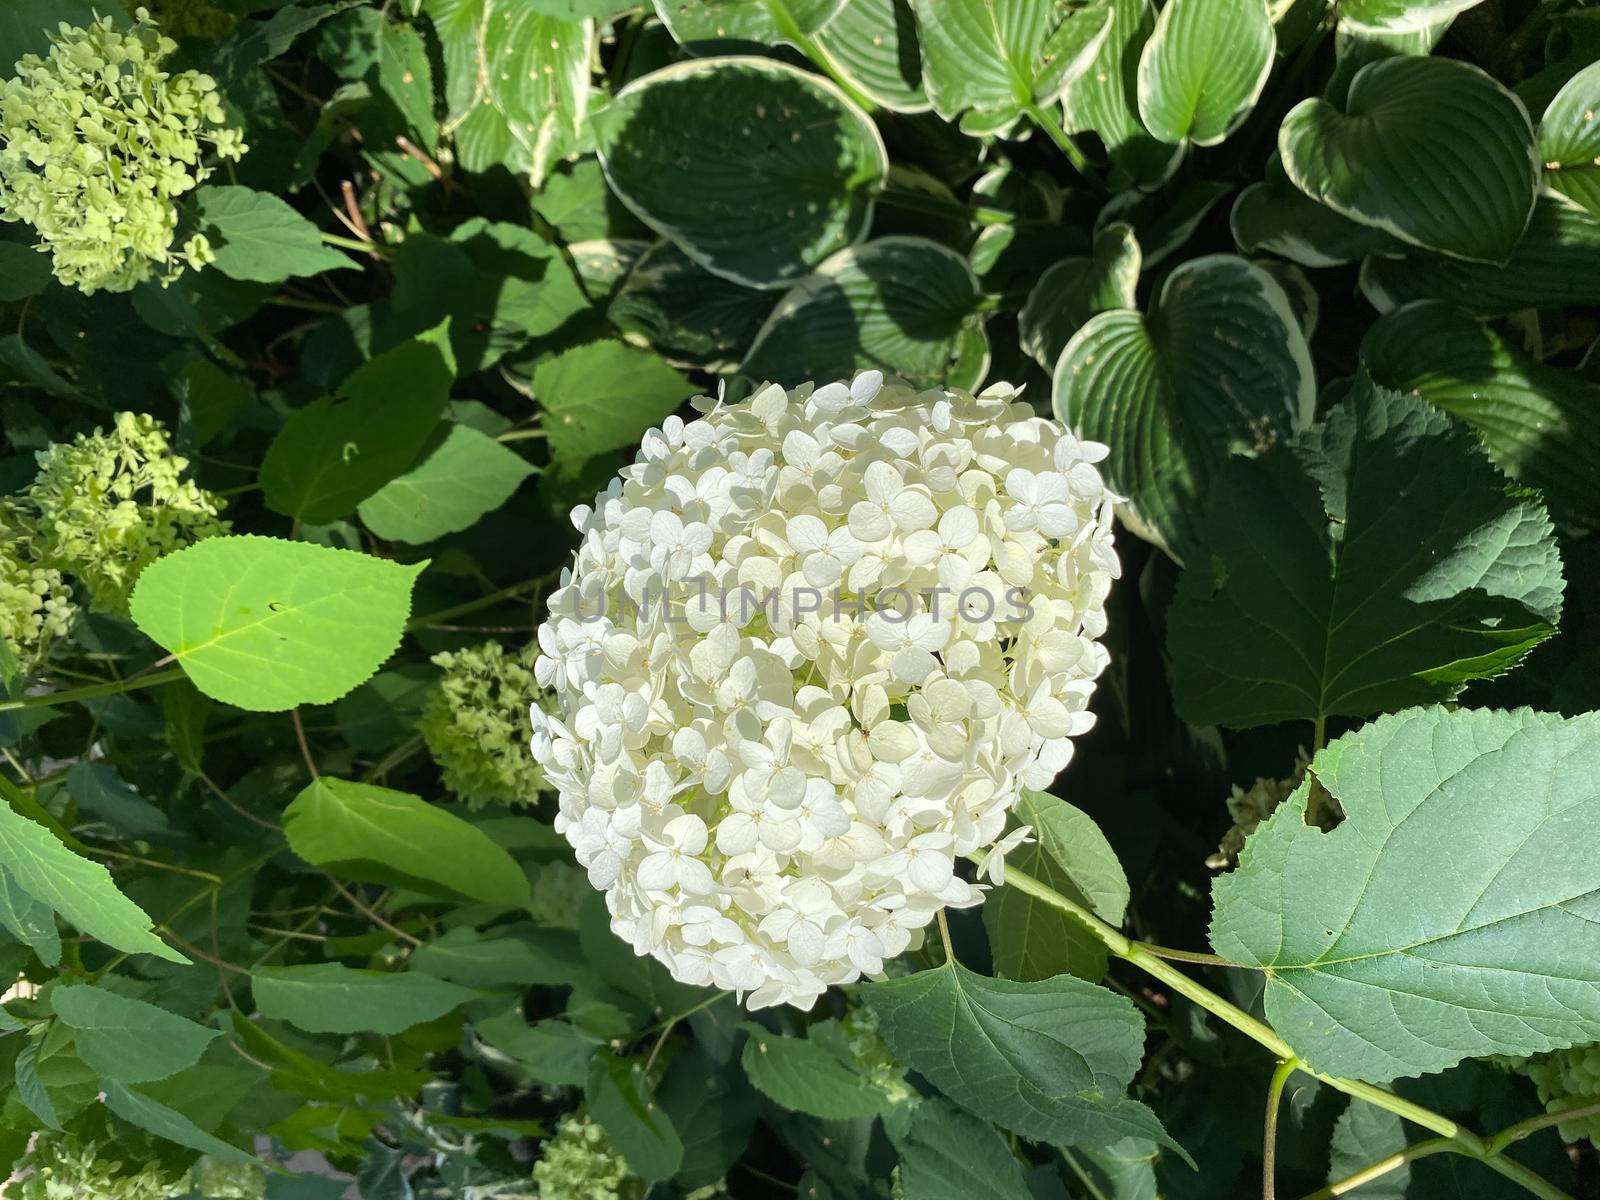 White hydrangea - Snowball tree. Hydrangea flowers are very unique. This flower can change color, ranging from white, red, to purple. Color changes in hydrangeas indicate the natural pH levels in the soil content.